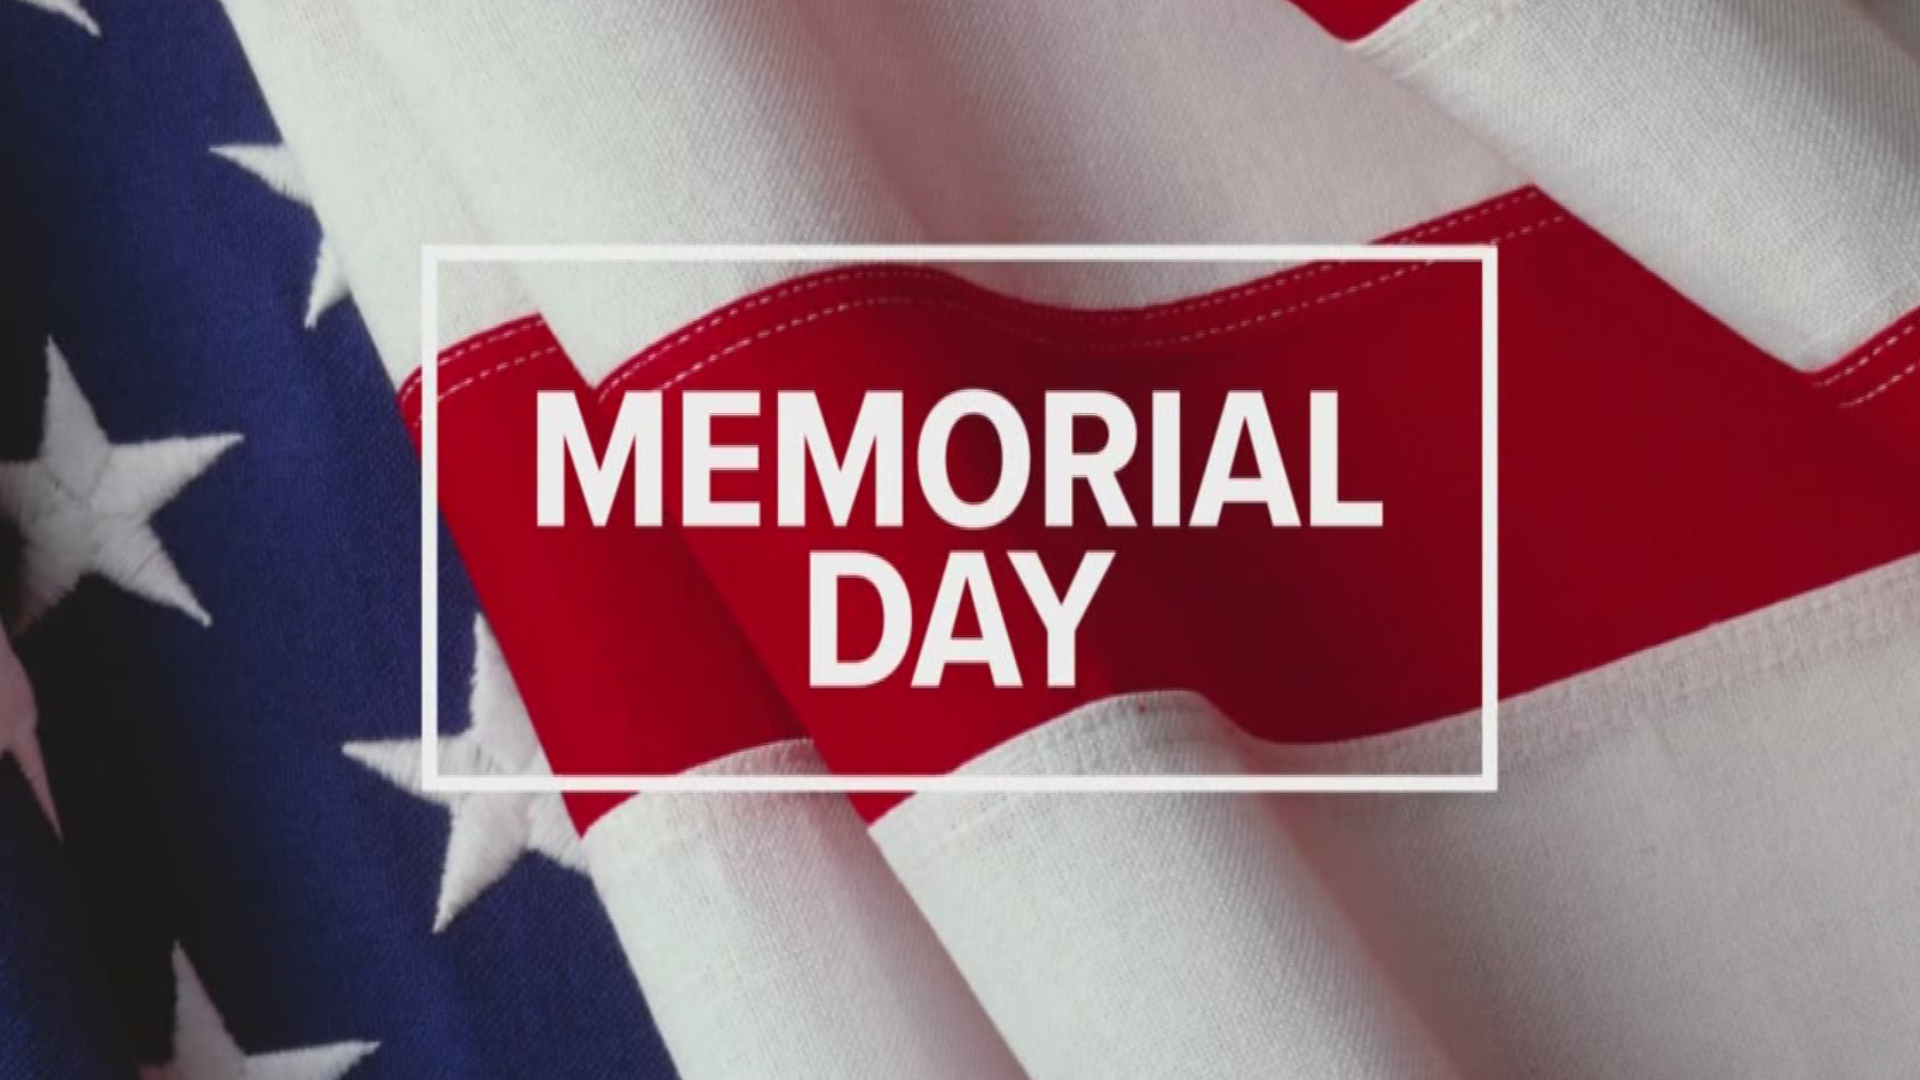 Memorial Day gives us a chance to honor those who died serving the United States. Here are some you can observe the day in and around Spokane.